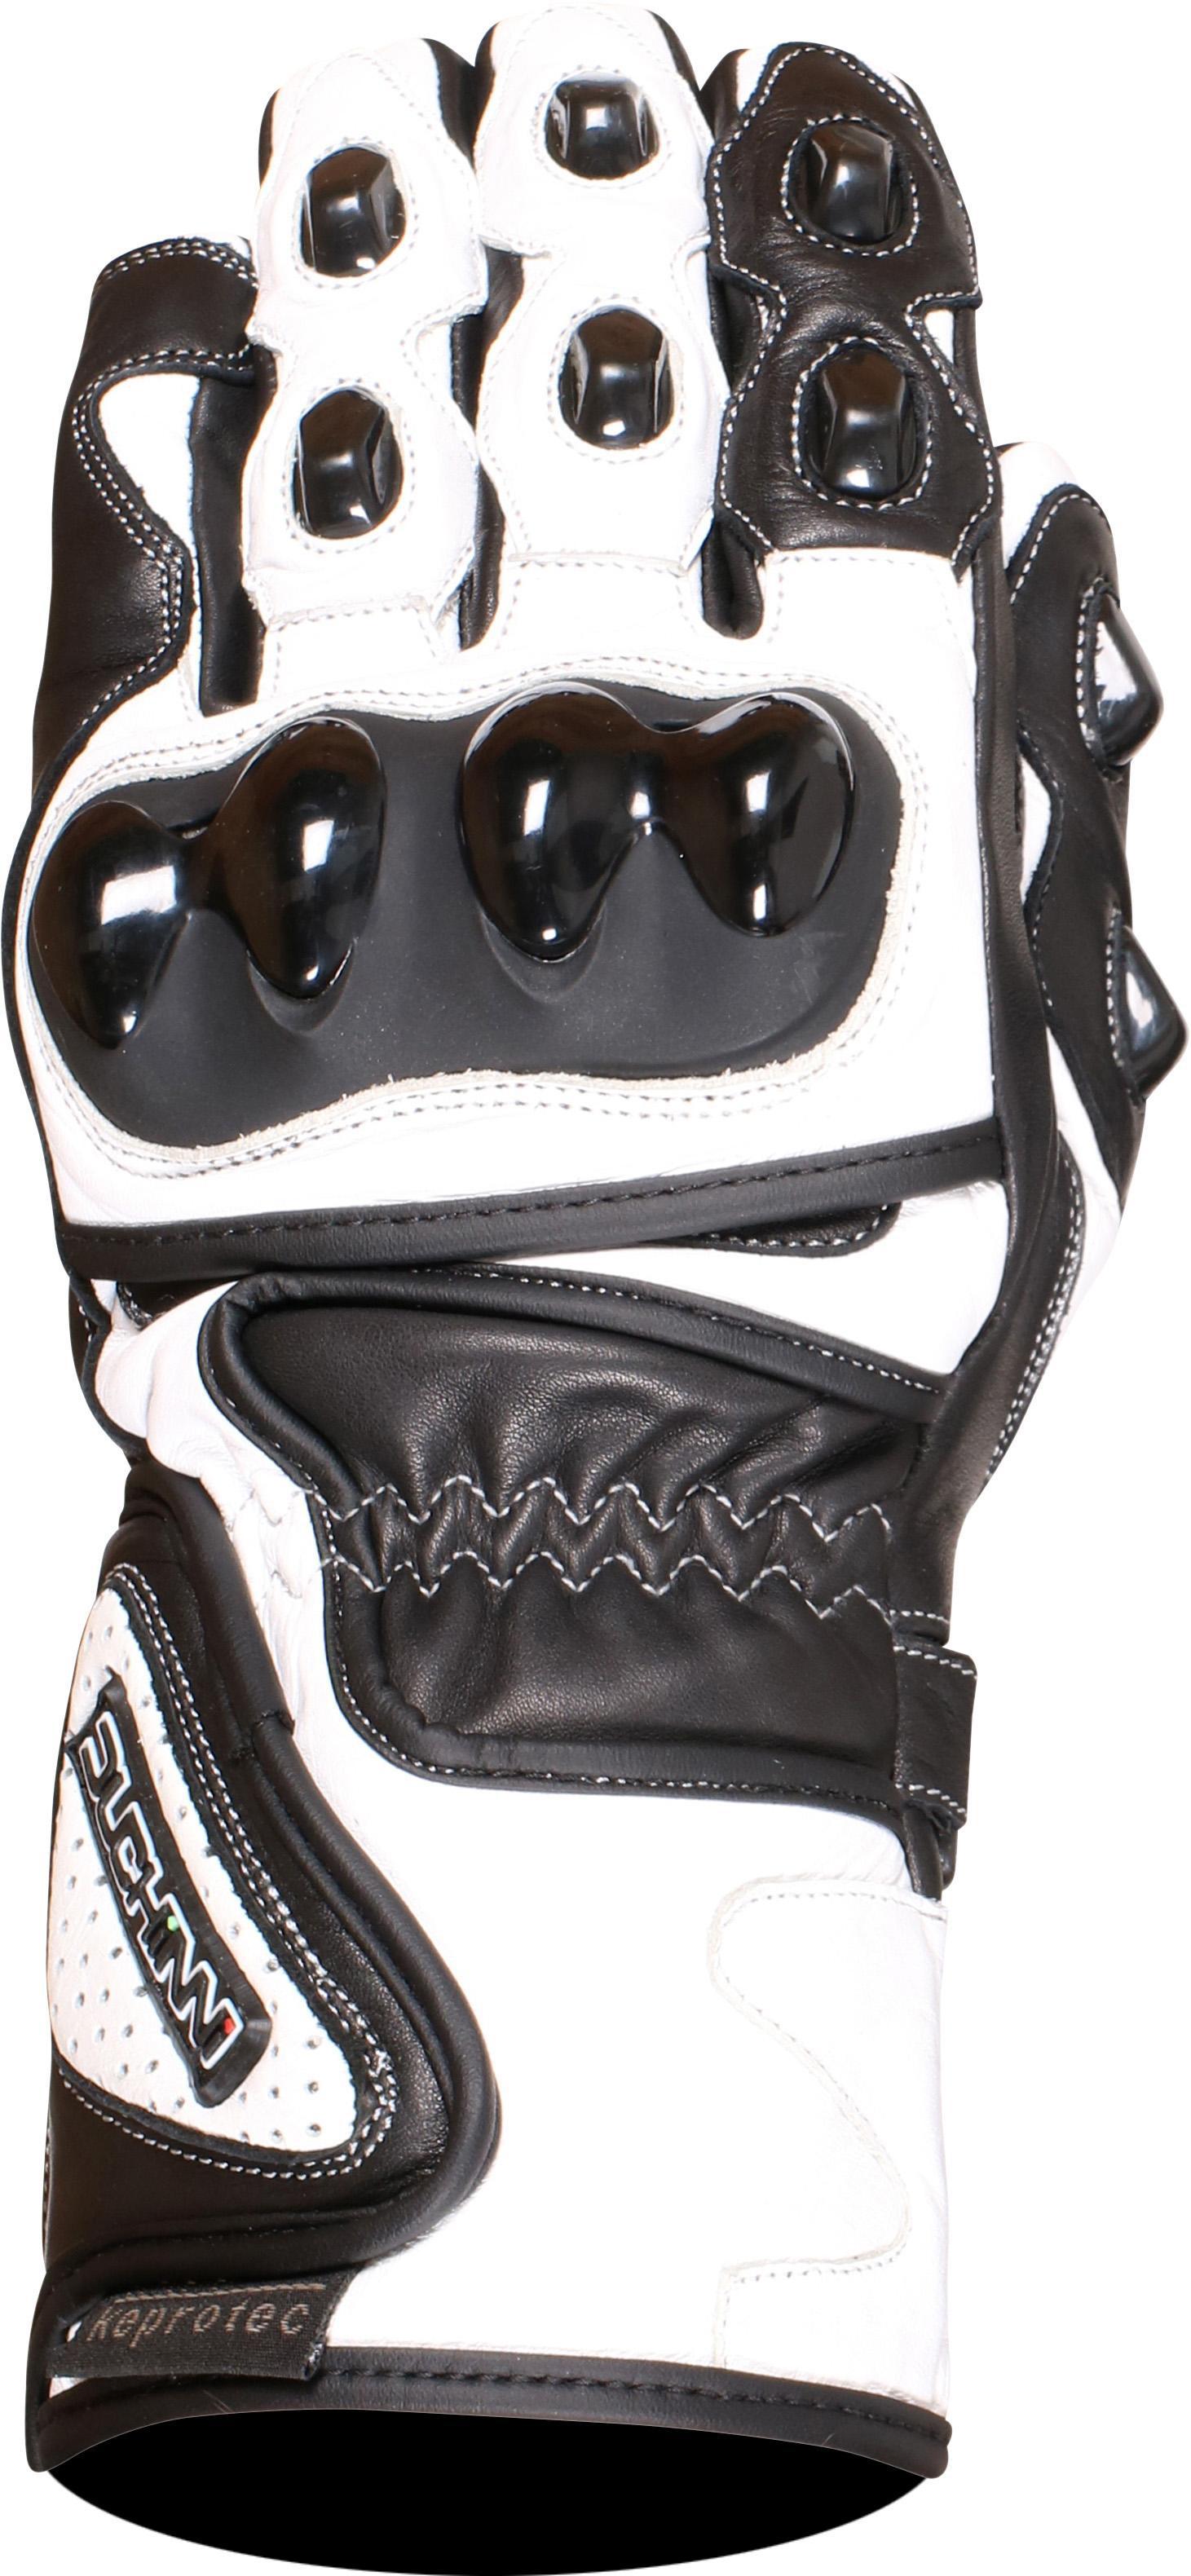 Duchinni Dr1 Motorcycle Gloves - Black And White, 2Xl